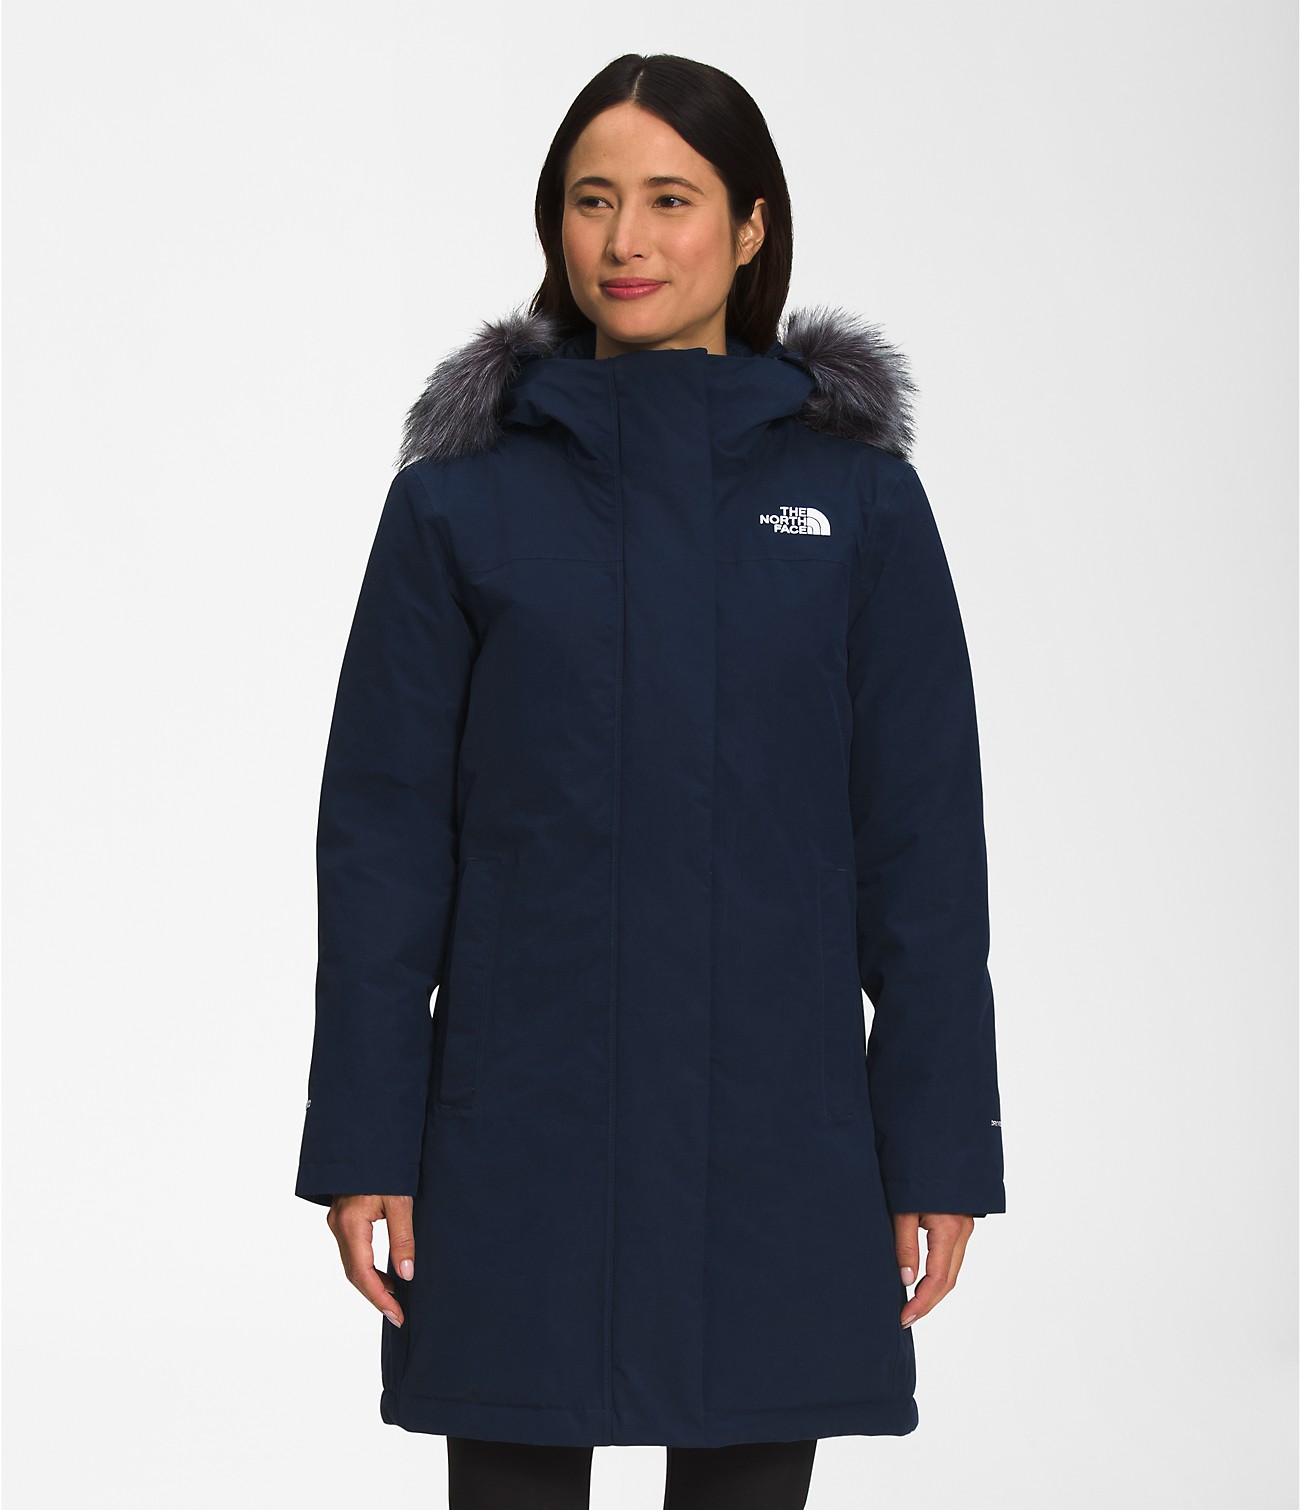 Unlock Wilderness' choice in the Mountain Hardwear Vs North Face comparison, the Arctic Parka by The North Face